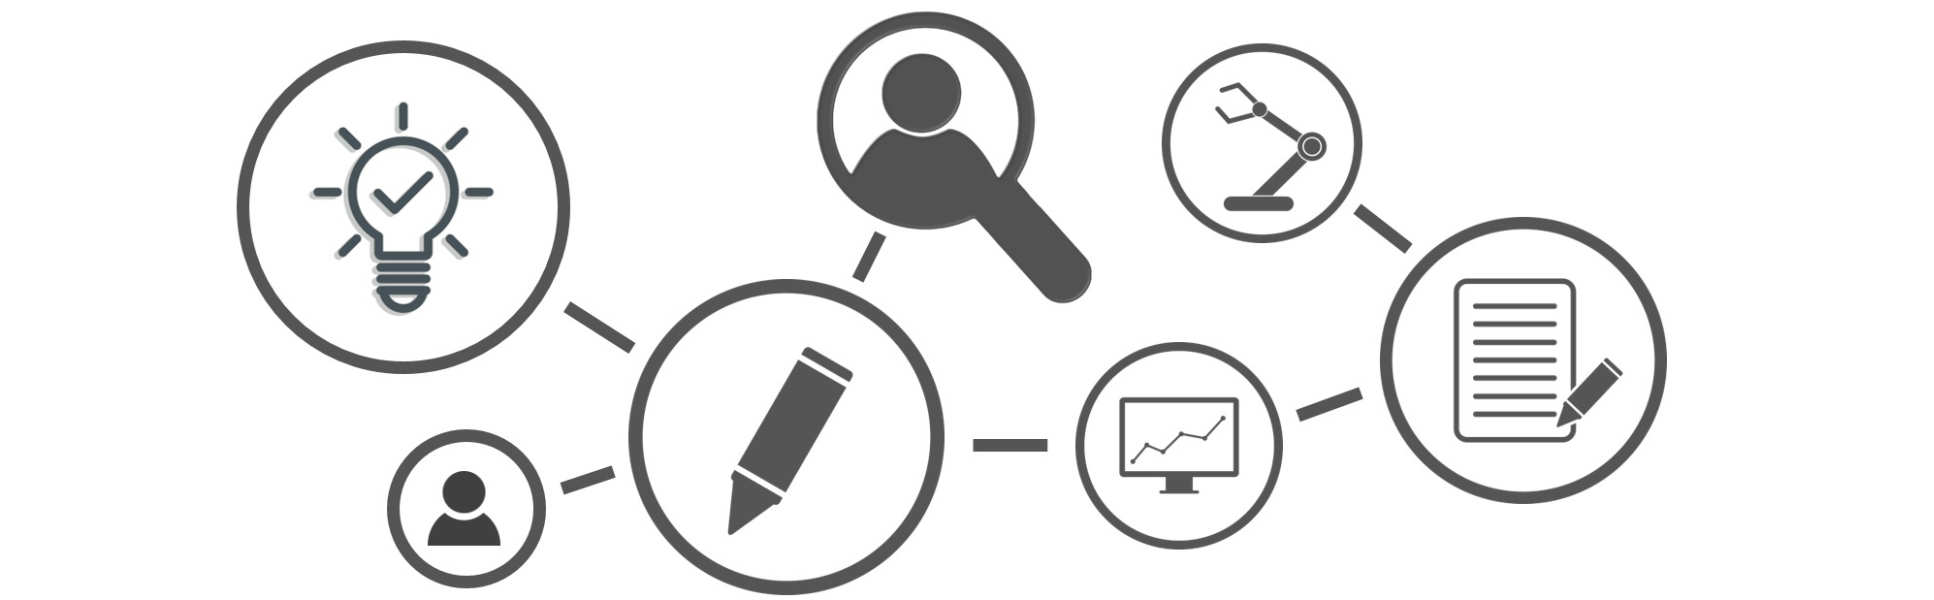 Design and checklist icons linked together